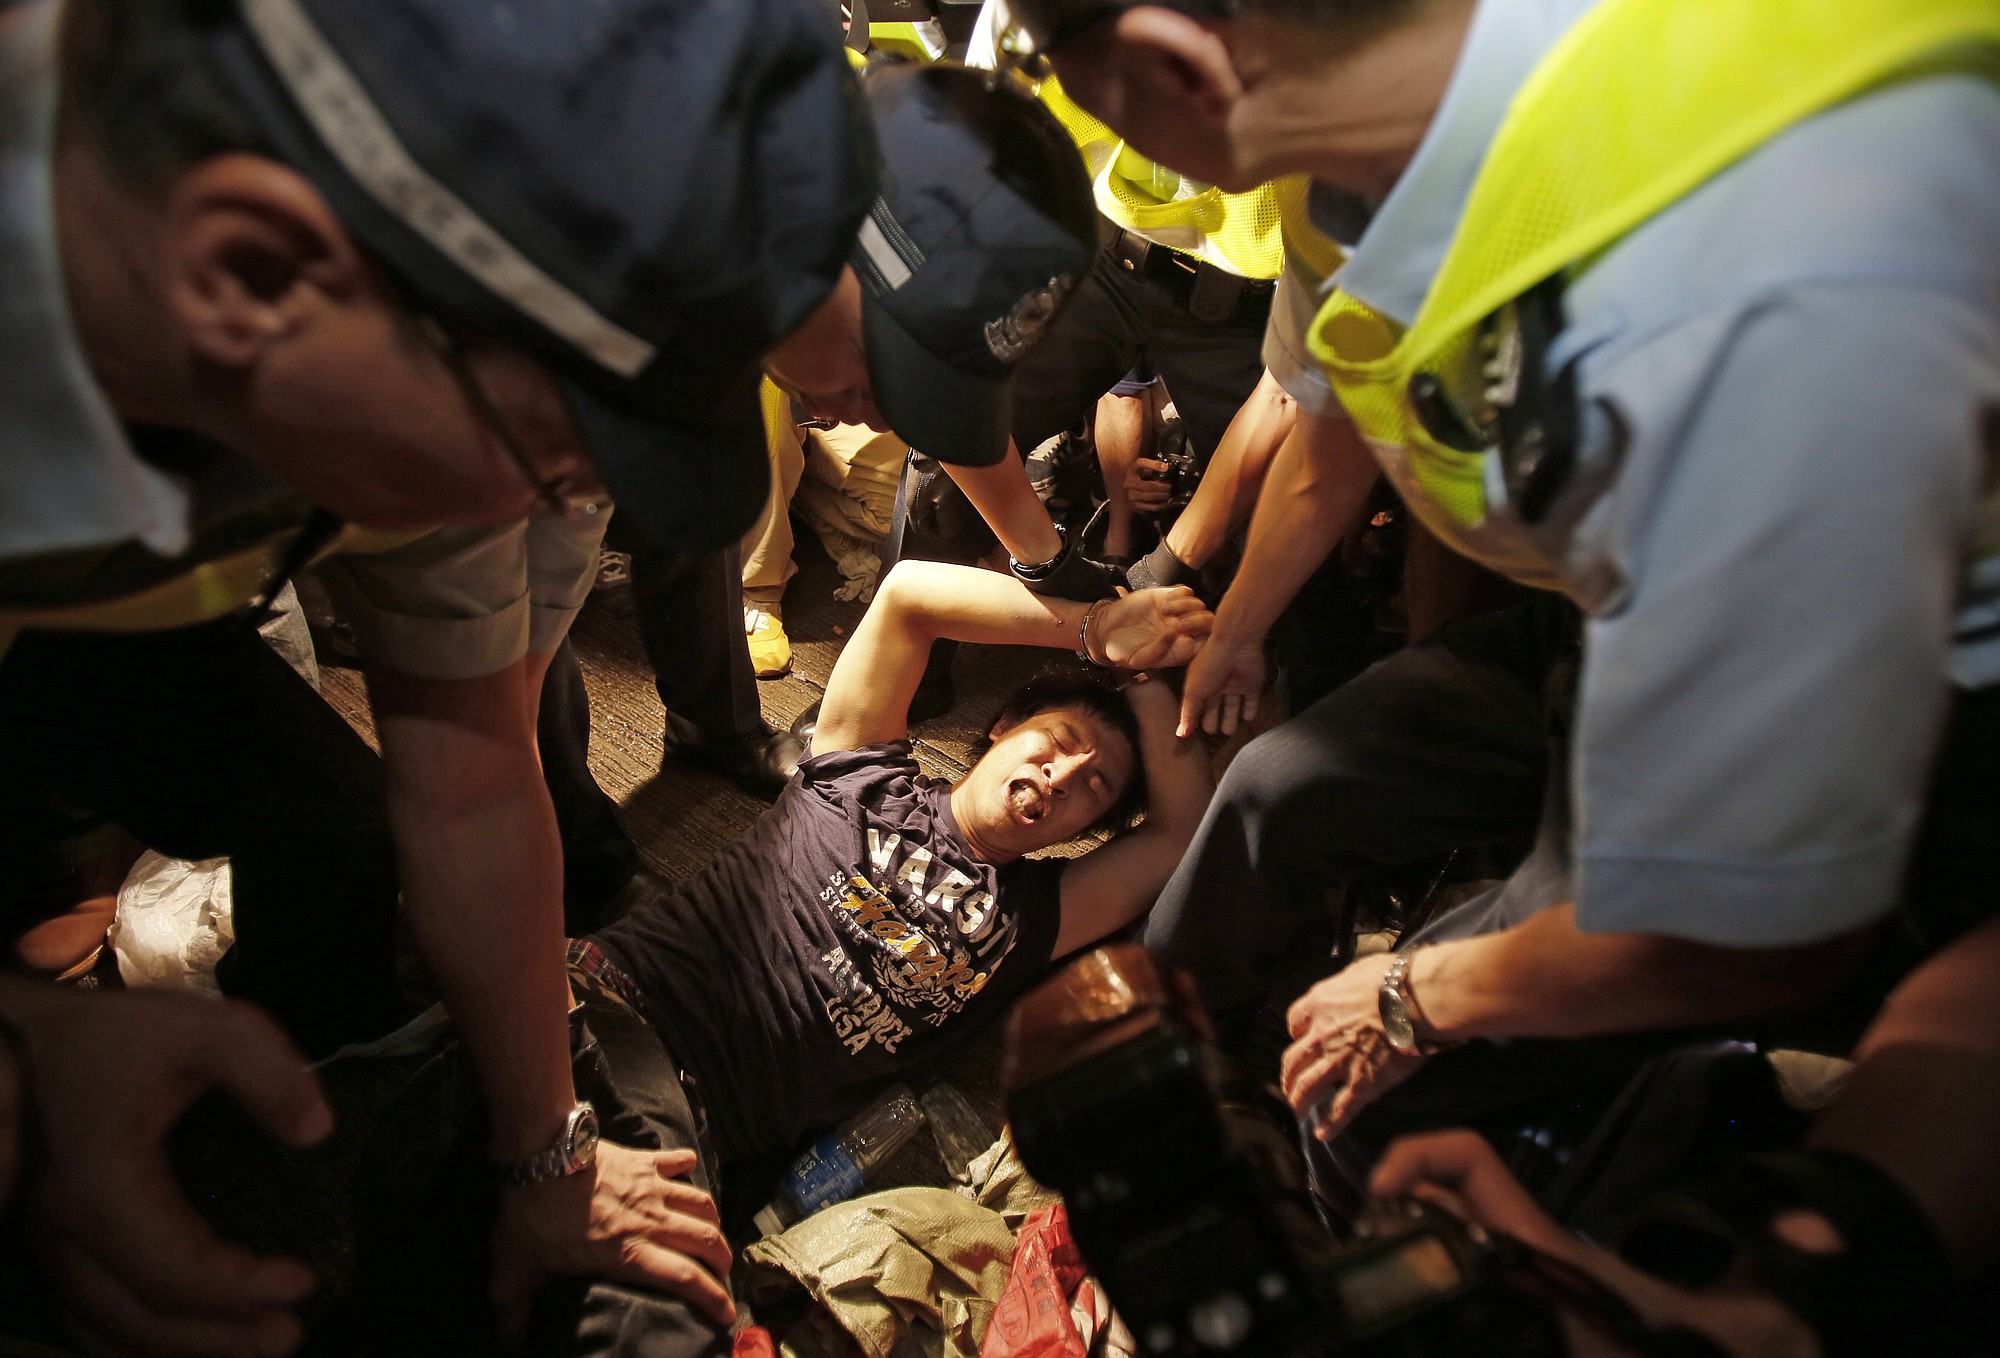 A man is cuffed by police and taken from the confrontation of pro-democracy student protesters and angry local residents Friday in Hong Kong.